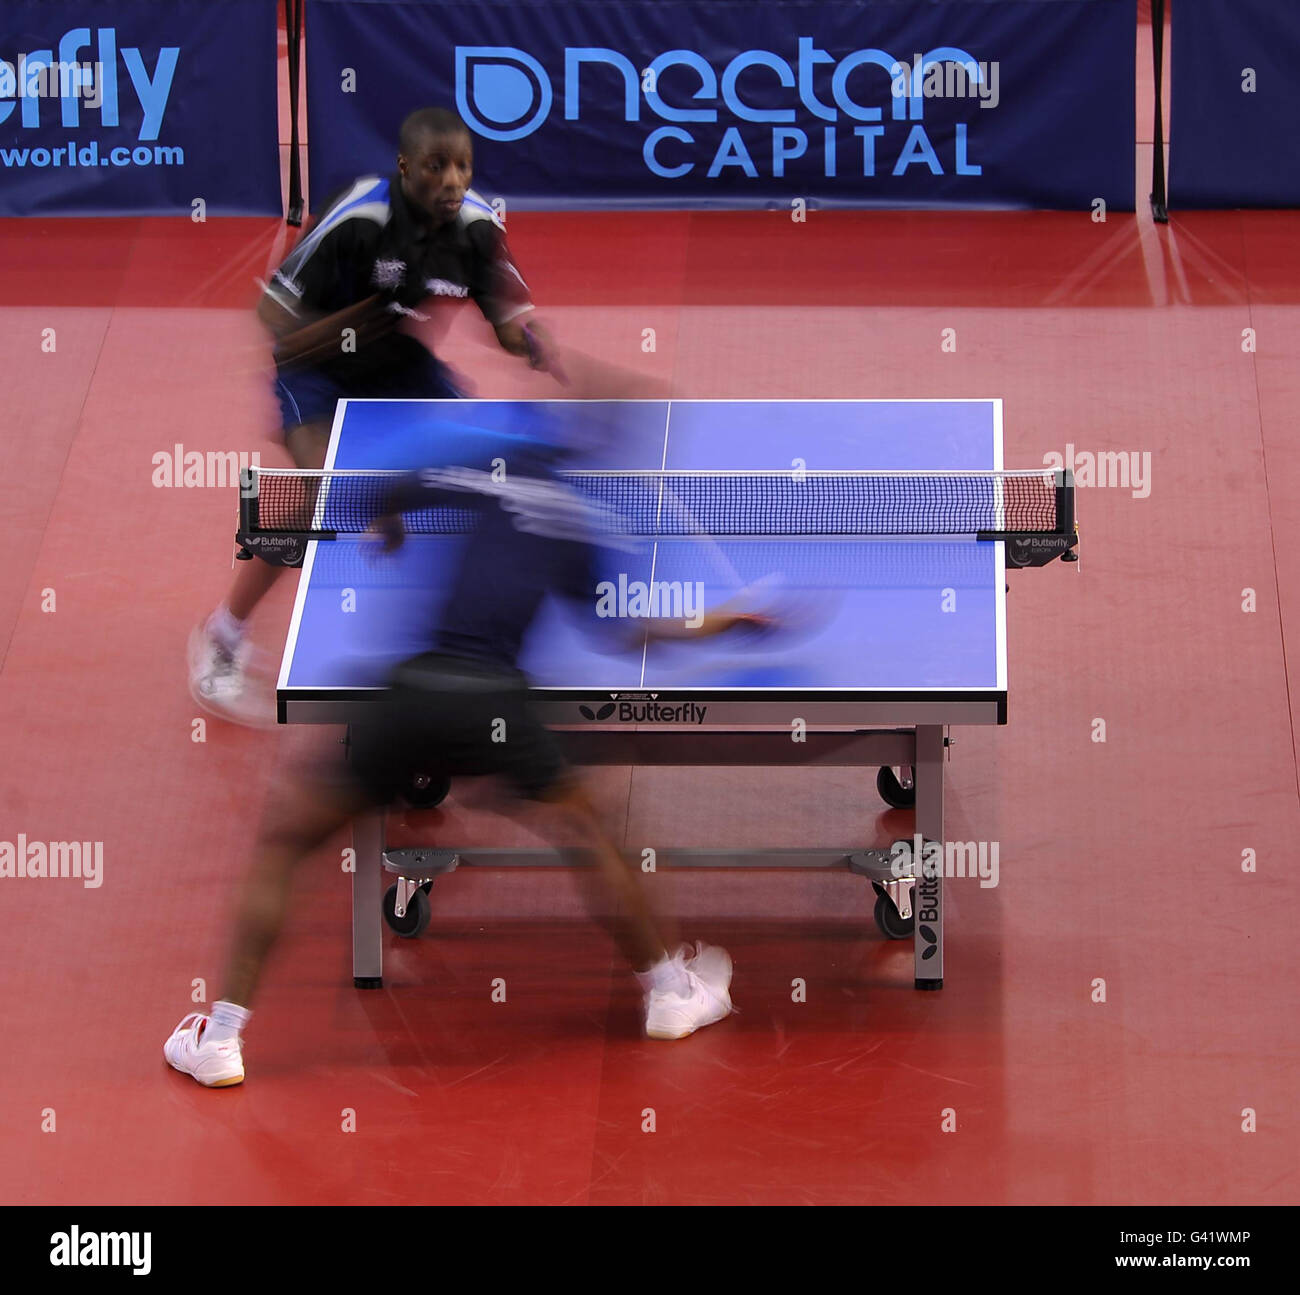 England's Darius Knight (top) in action against France's Addel-Kader  Salifou during their Men's Qualifying group match during the Pro Tour  English Open at the English Institute of Sport, Sheffield Stock Photo -